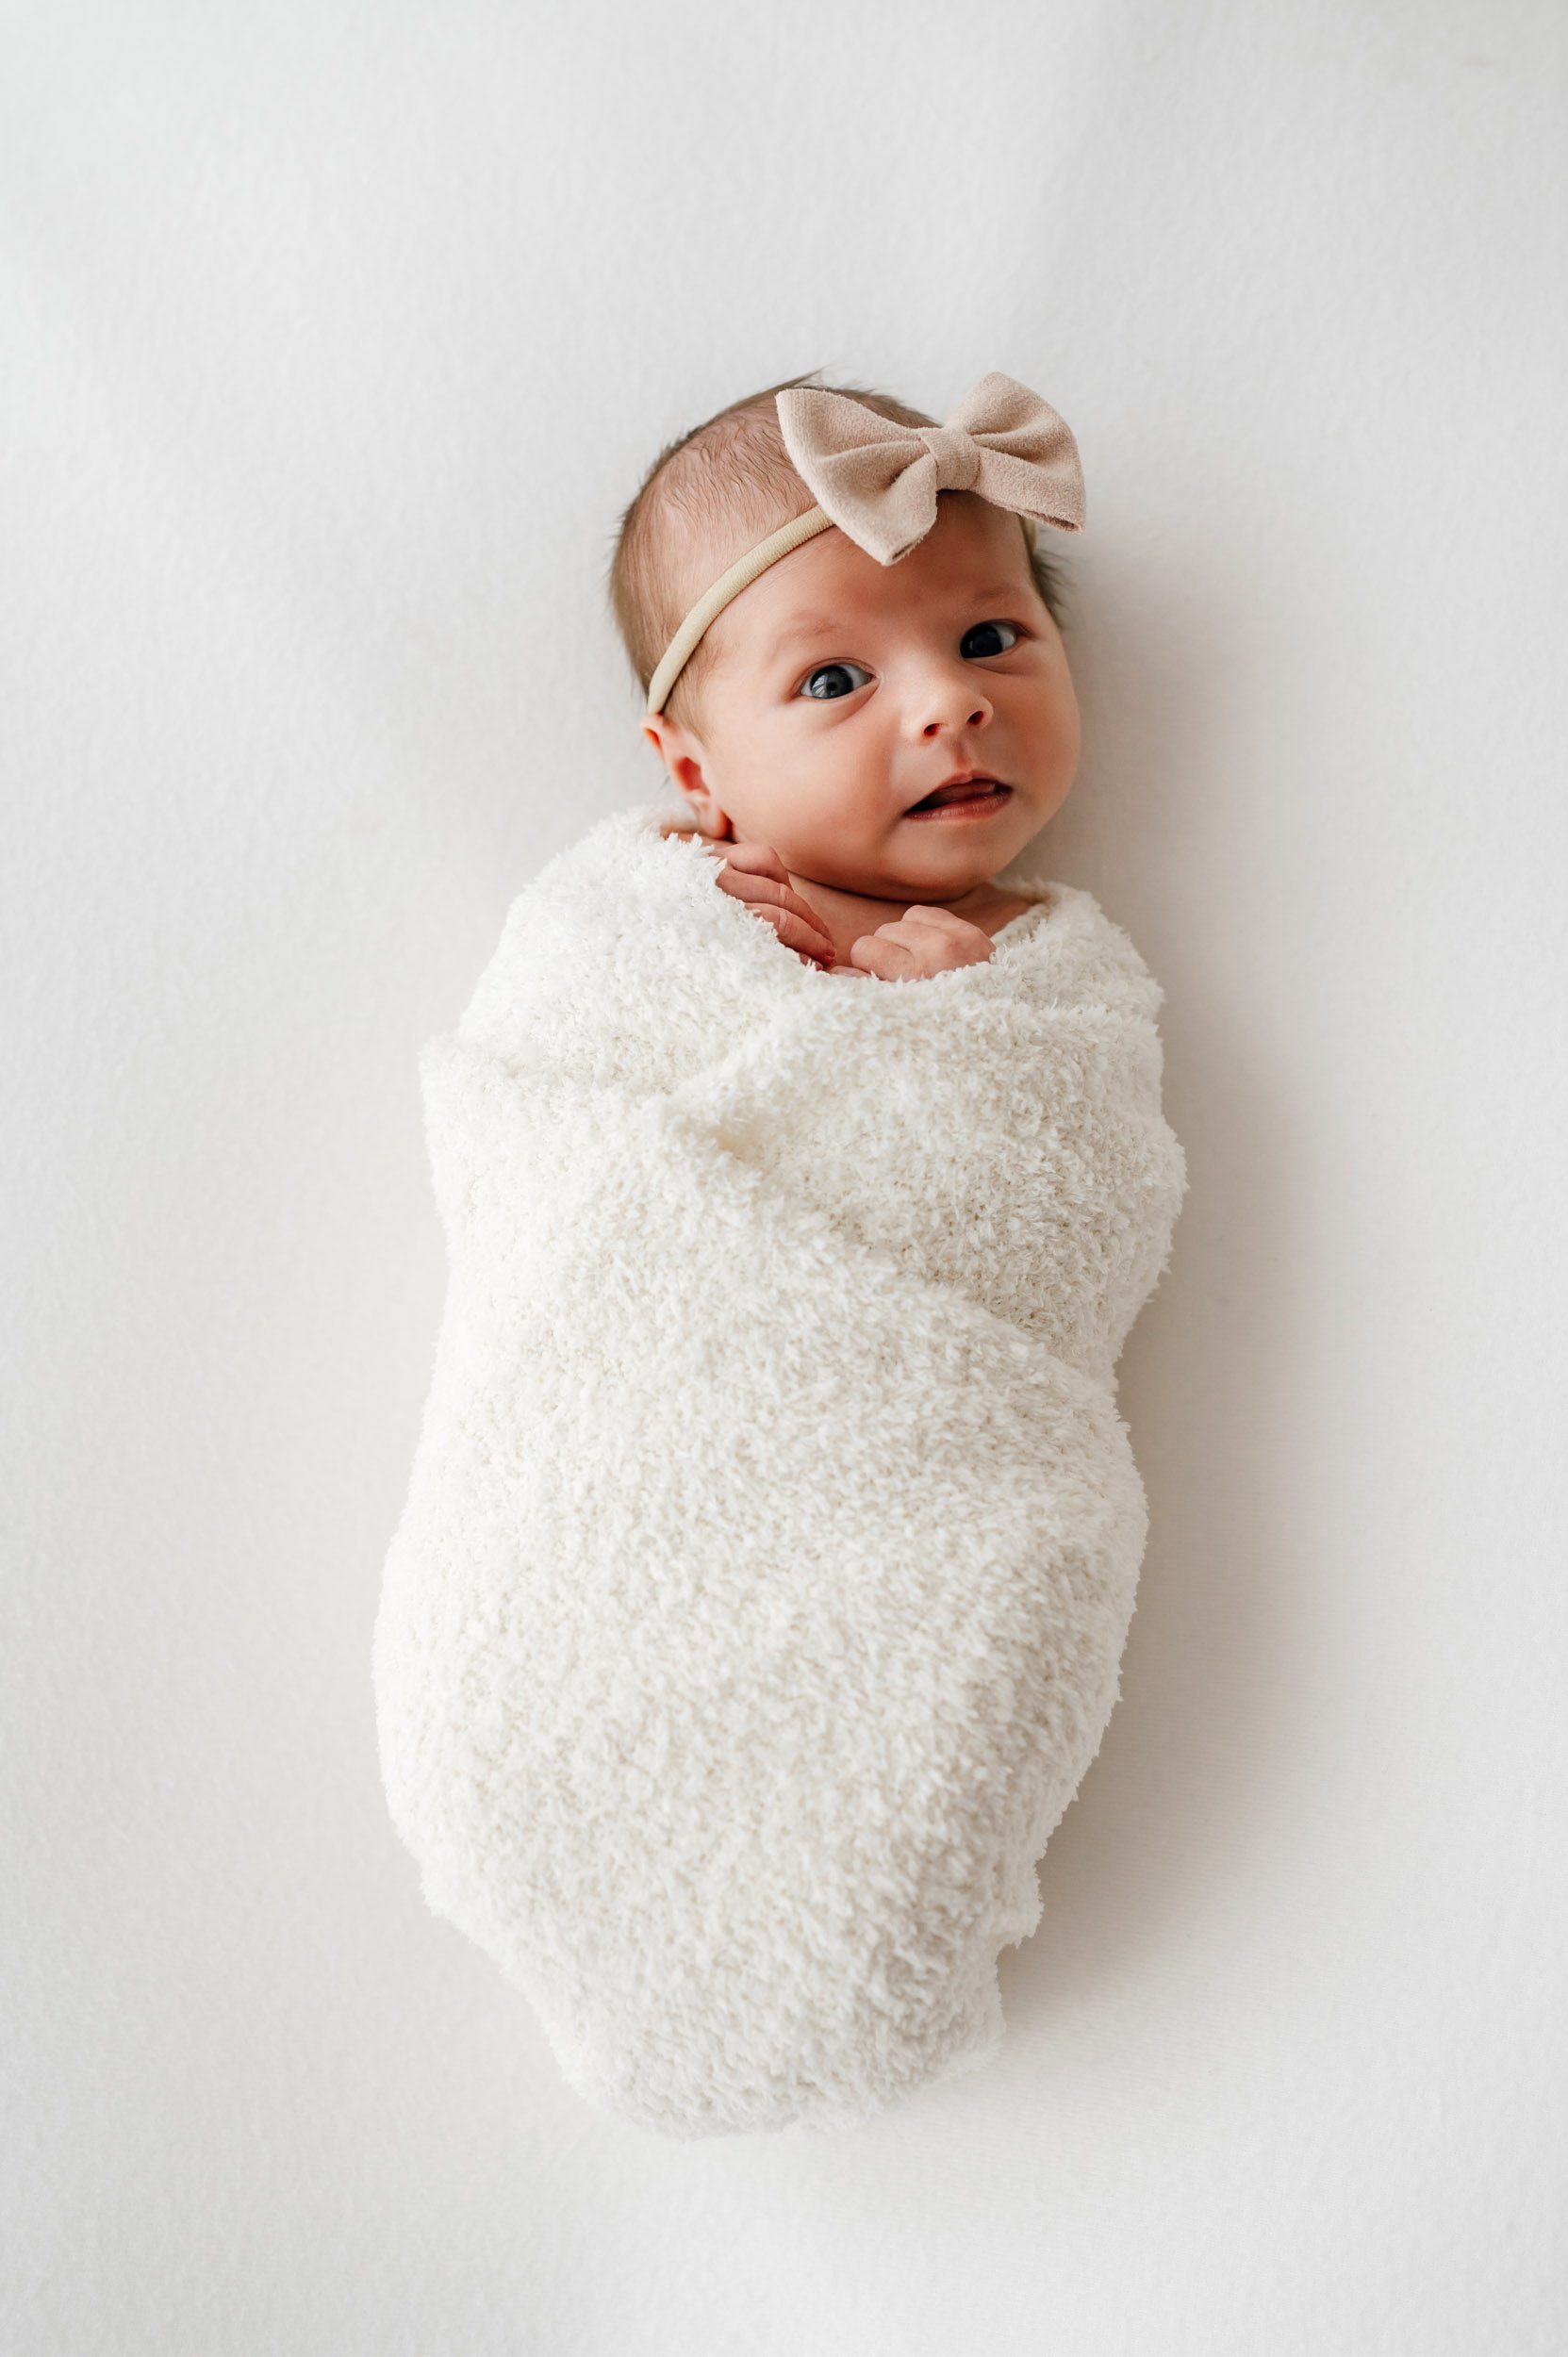 a baby girl wrapped in a fuzzy white swaddle wearing a headband with a light pink bow gazing up at the camera during a newborn photography session